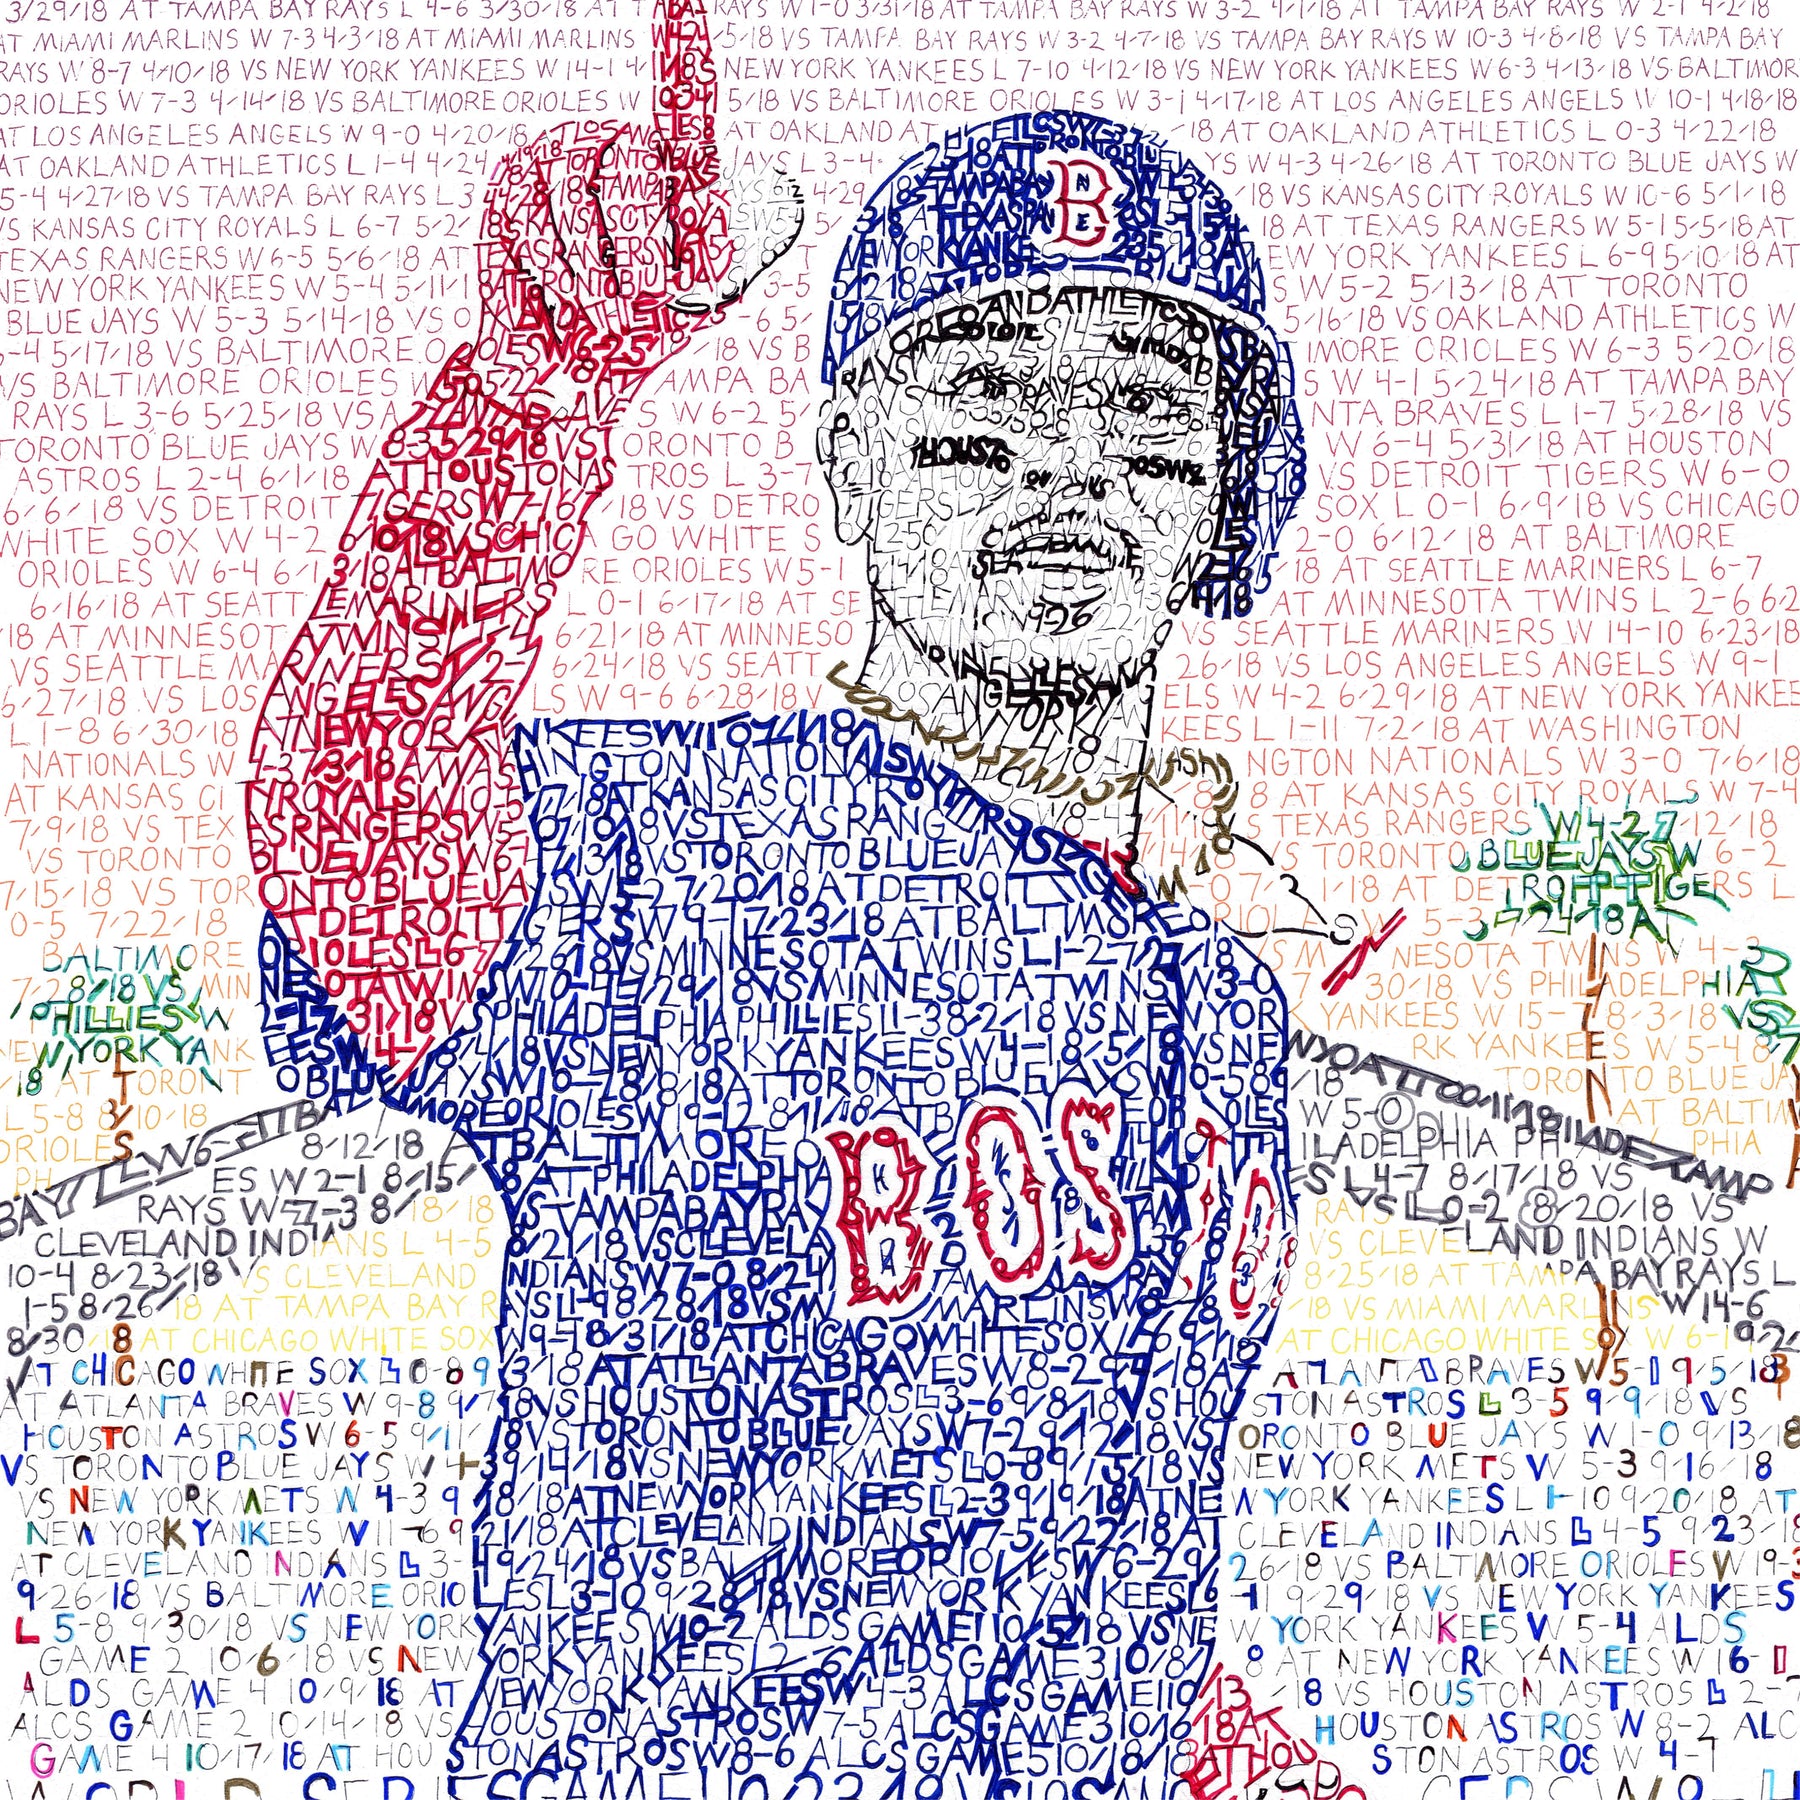  Mookie Betts Boston Red Sox Poster Print, Real Player